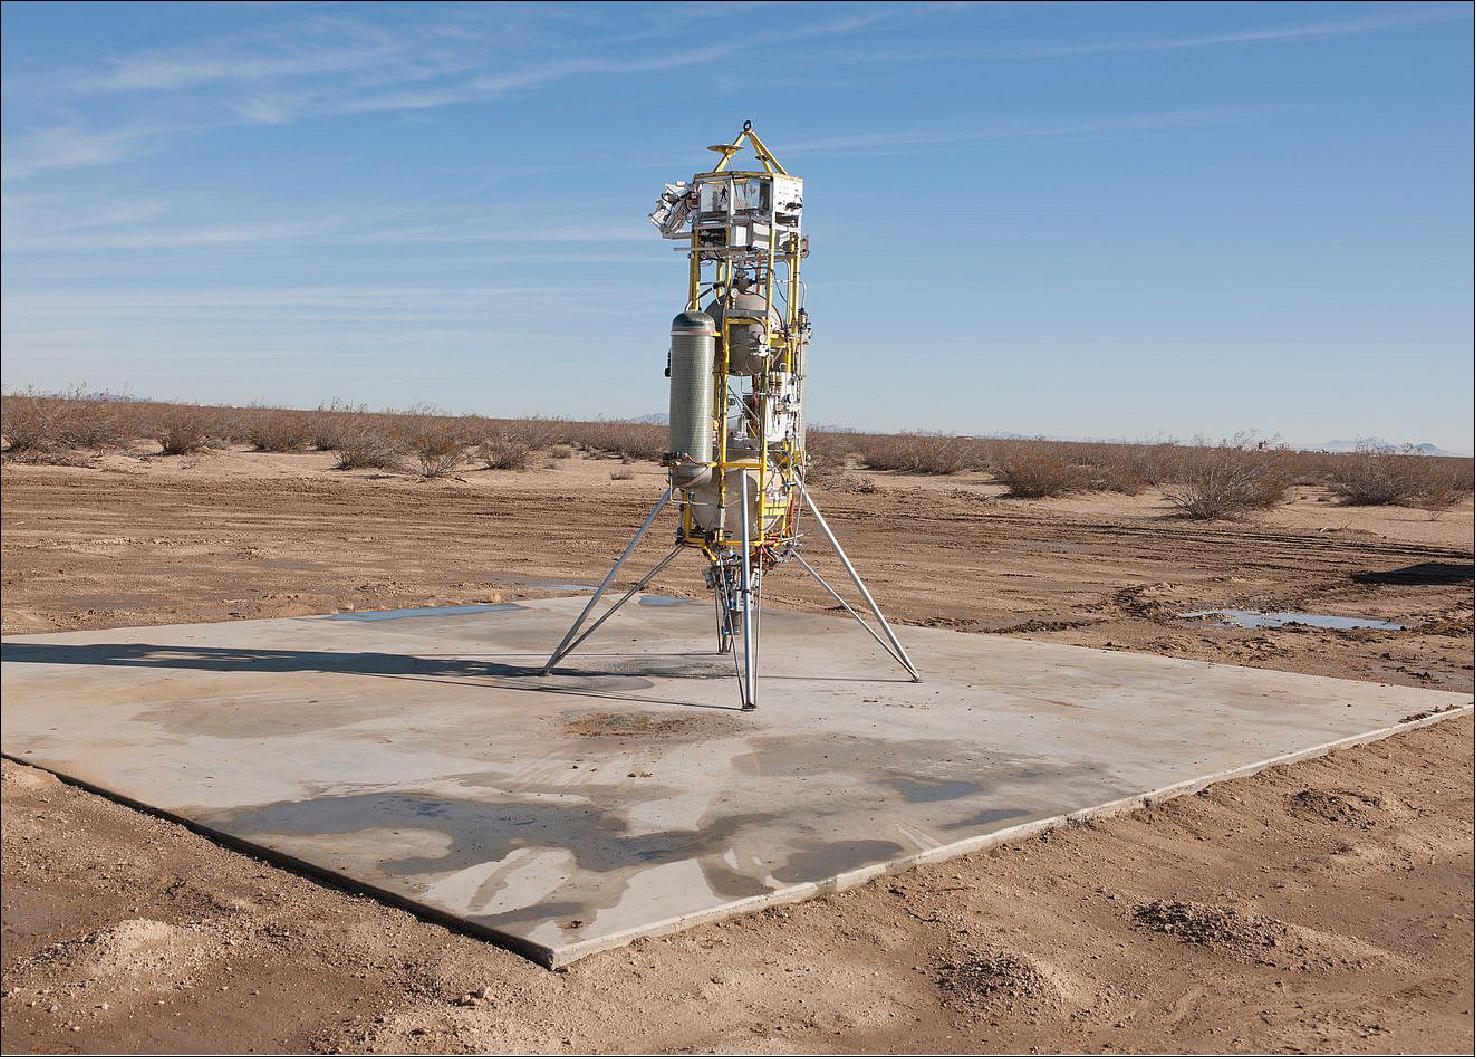 Figure 51: Masten's Xombie VTVL system sits on a launchpad in Mojave, California in December 2014, prepared for a flight test that would help prove lander vision system capabilities for the Mars 2020 Perseverance rover mission (image credit: Masten Space Systems)